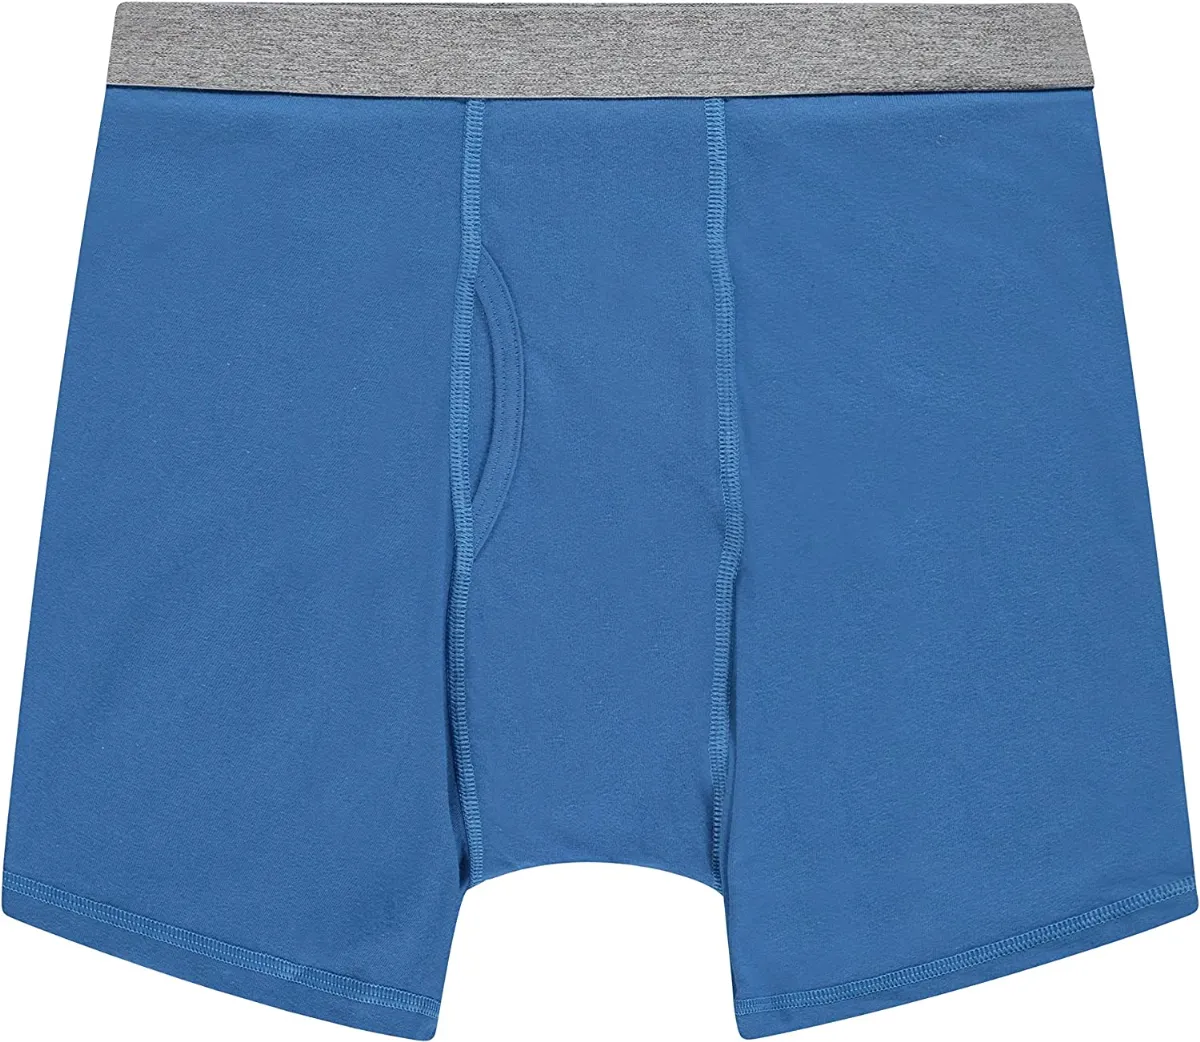 100% Cotton Boxer Briefs Underwear Assorted Colors, Size Large, 48 Pack - at - yachtandsmith.com -